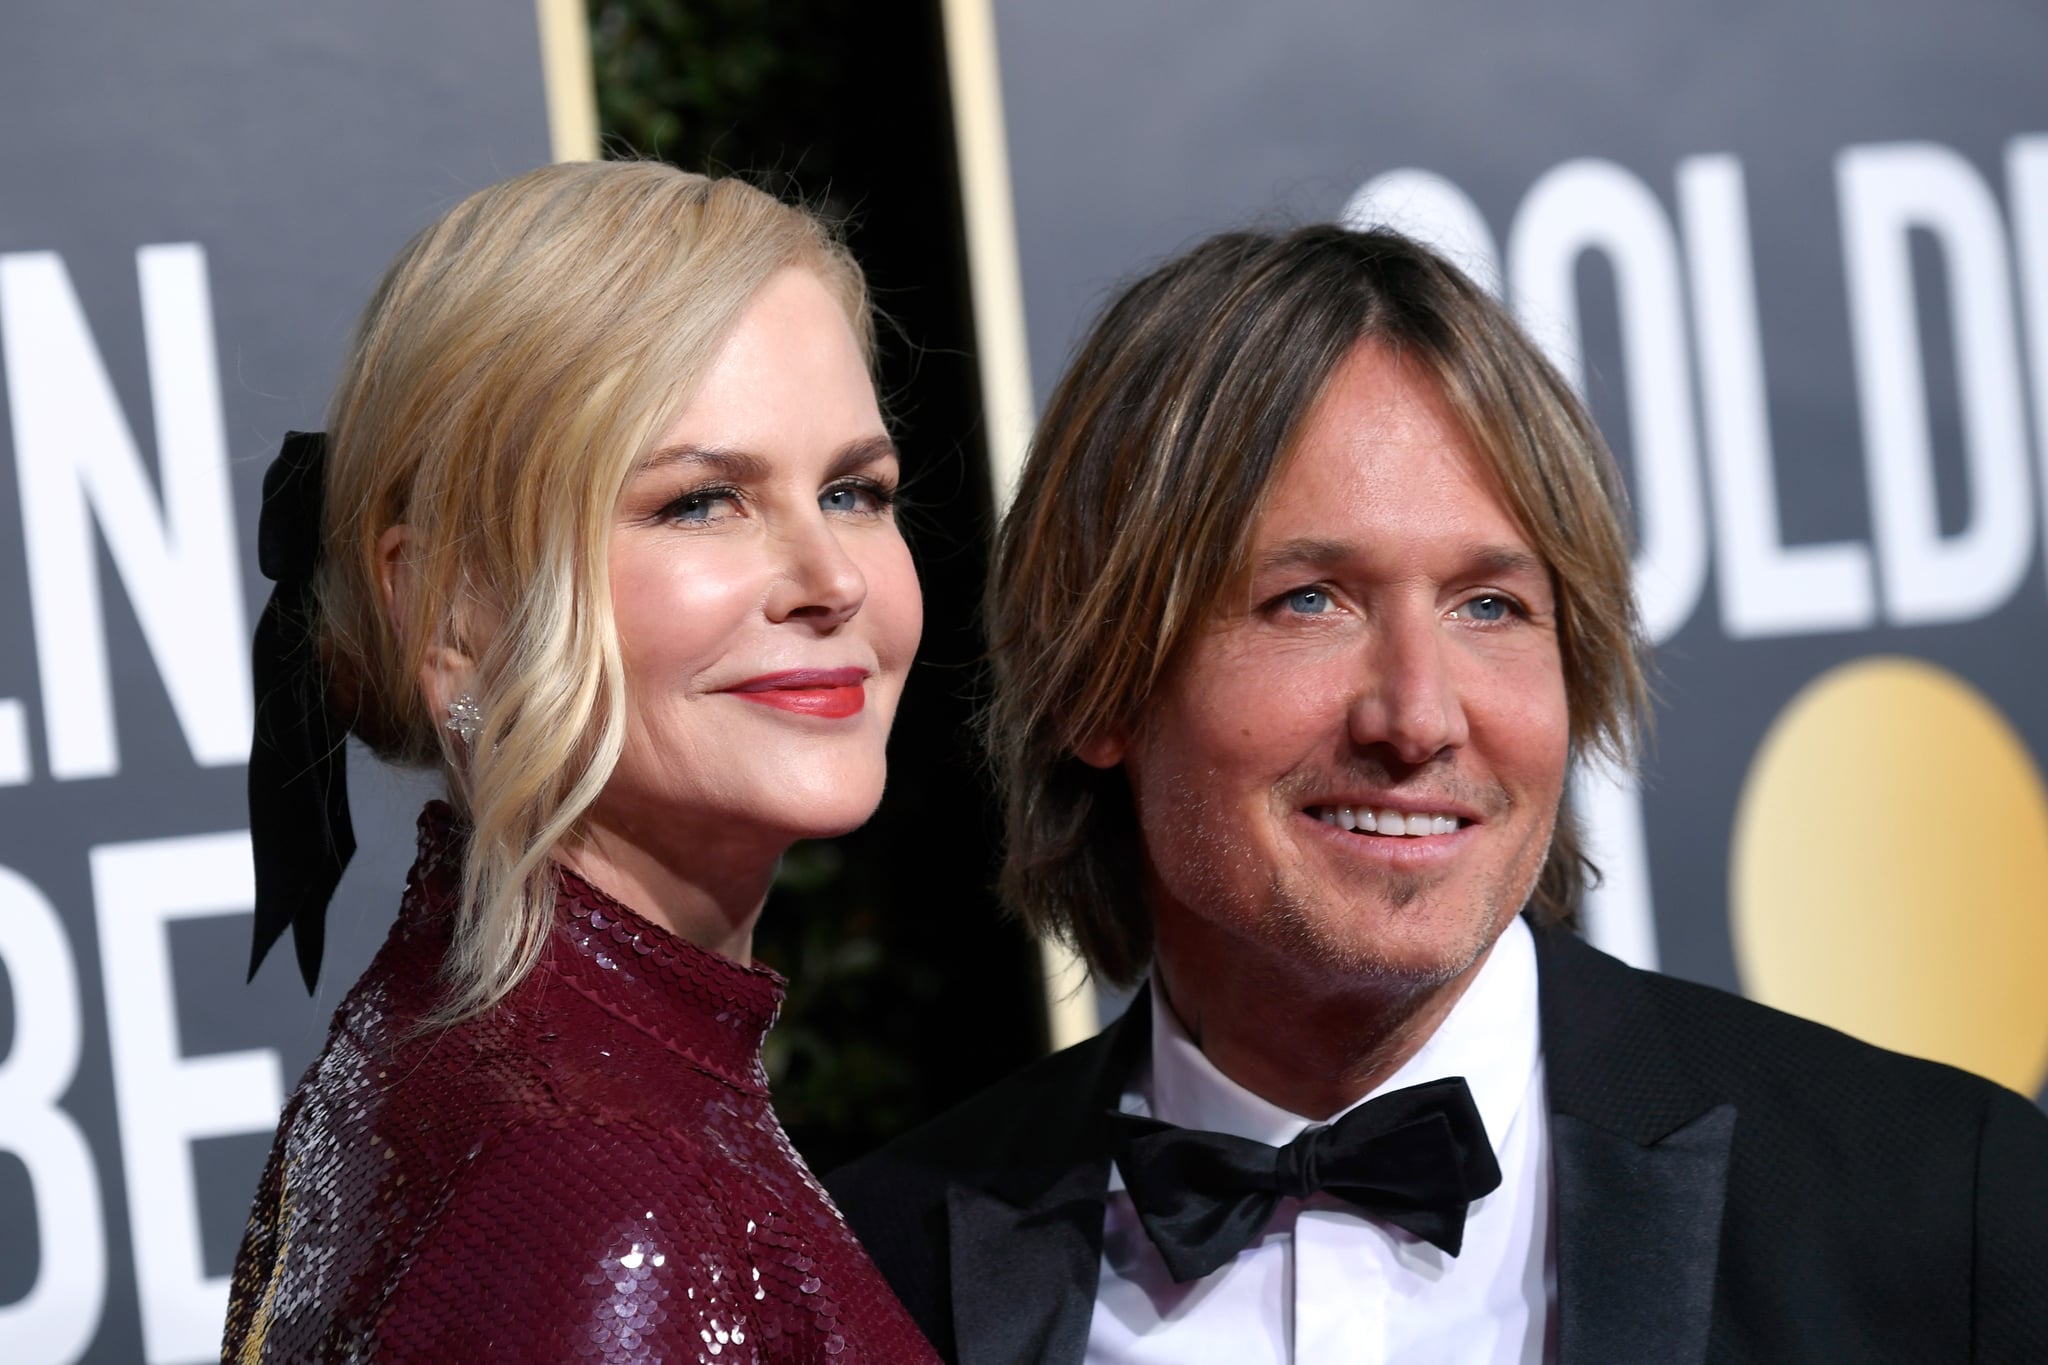 BEVERLY HILLS, CA - JANUARY 06:  Nicole Kidman (L) and Keith Urban attend the 76th Annual Golden Globe Awards at The Beverly Hilton Hotel on January 6, 2019 in Beverly Hills, California.  (Photo by Frazer Harrison/Getty Images)